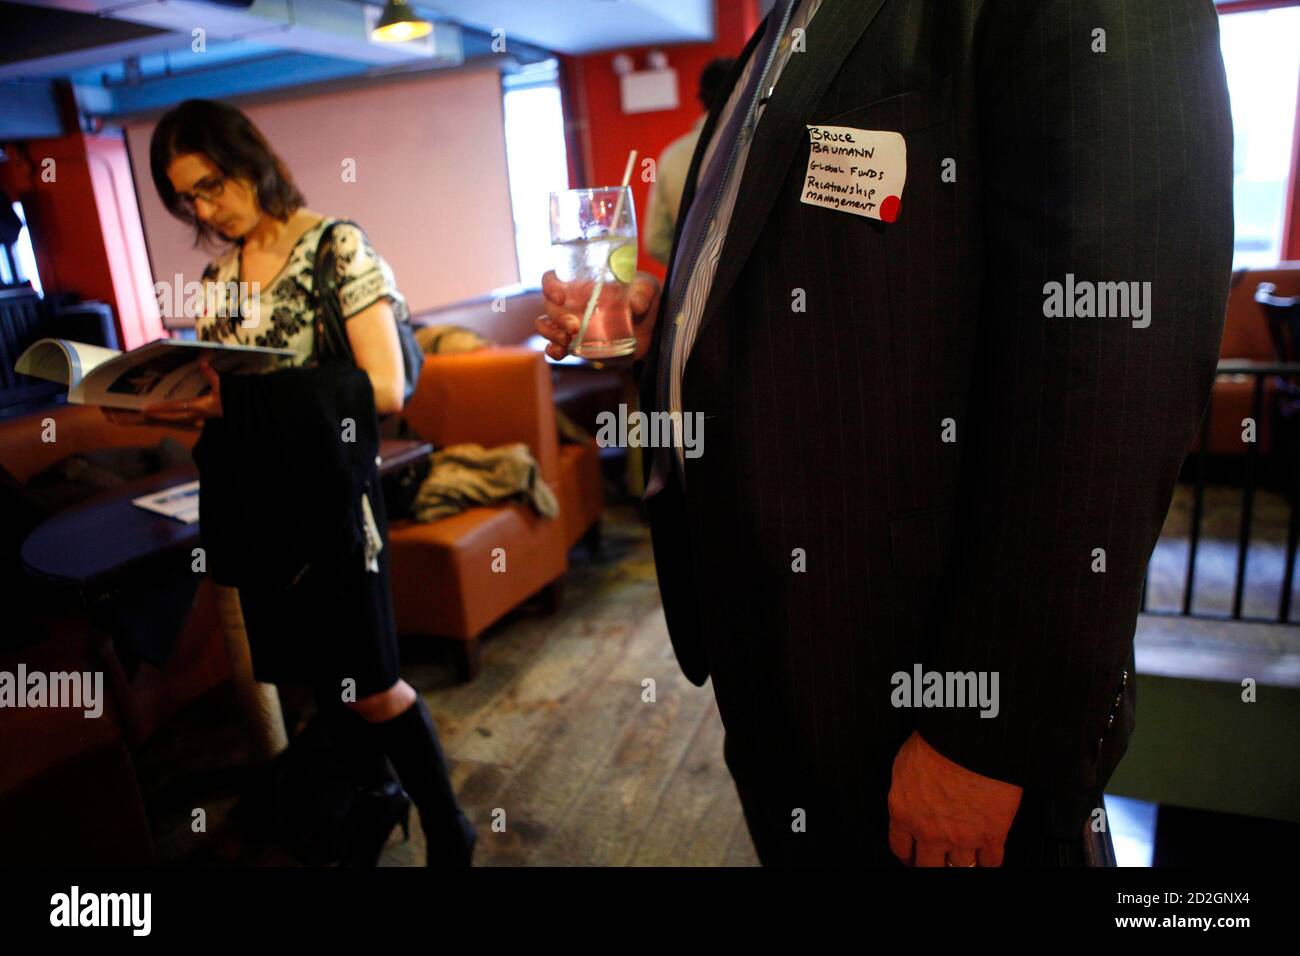 Jan Kodadek reads through a brochure as another man holds a drink during a  recruitment event at a pub in New York March 25, 2009. The group calls  itself 